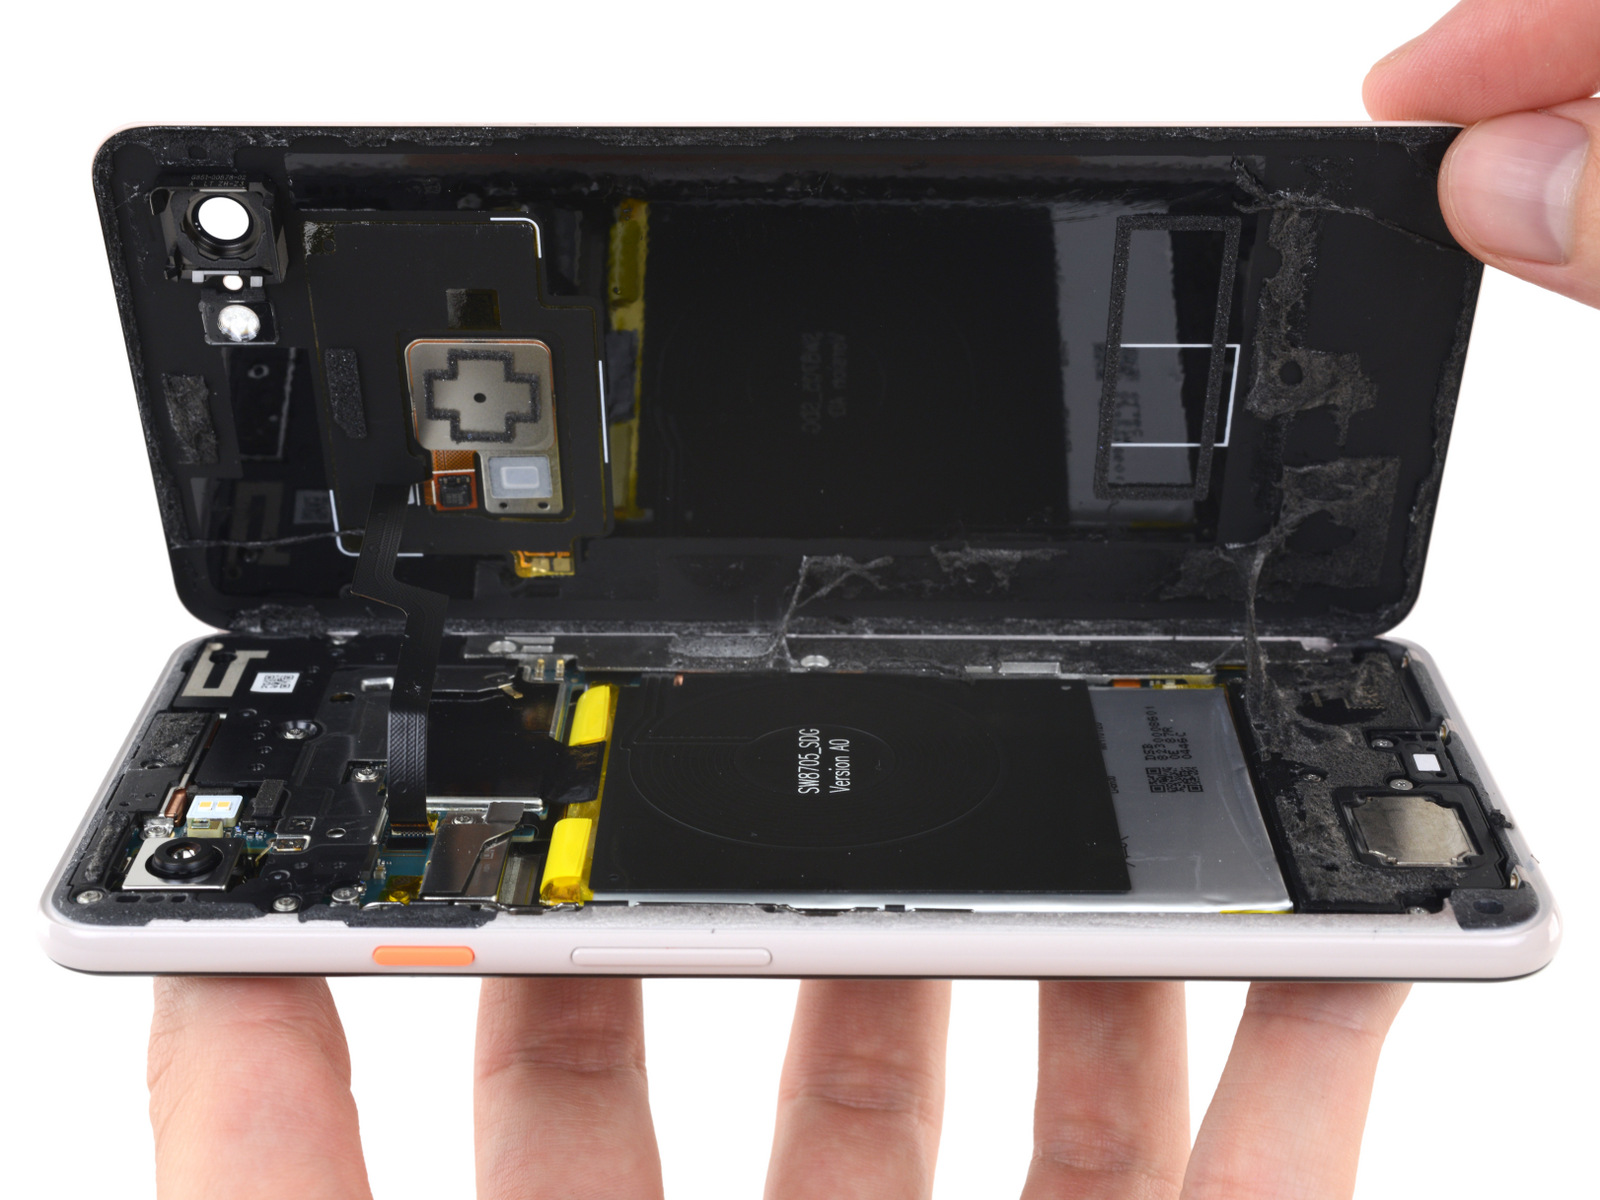 Pixel 3 XL gets the iFixit teardown treatment revealing a Samsung display and more glue